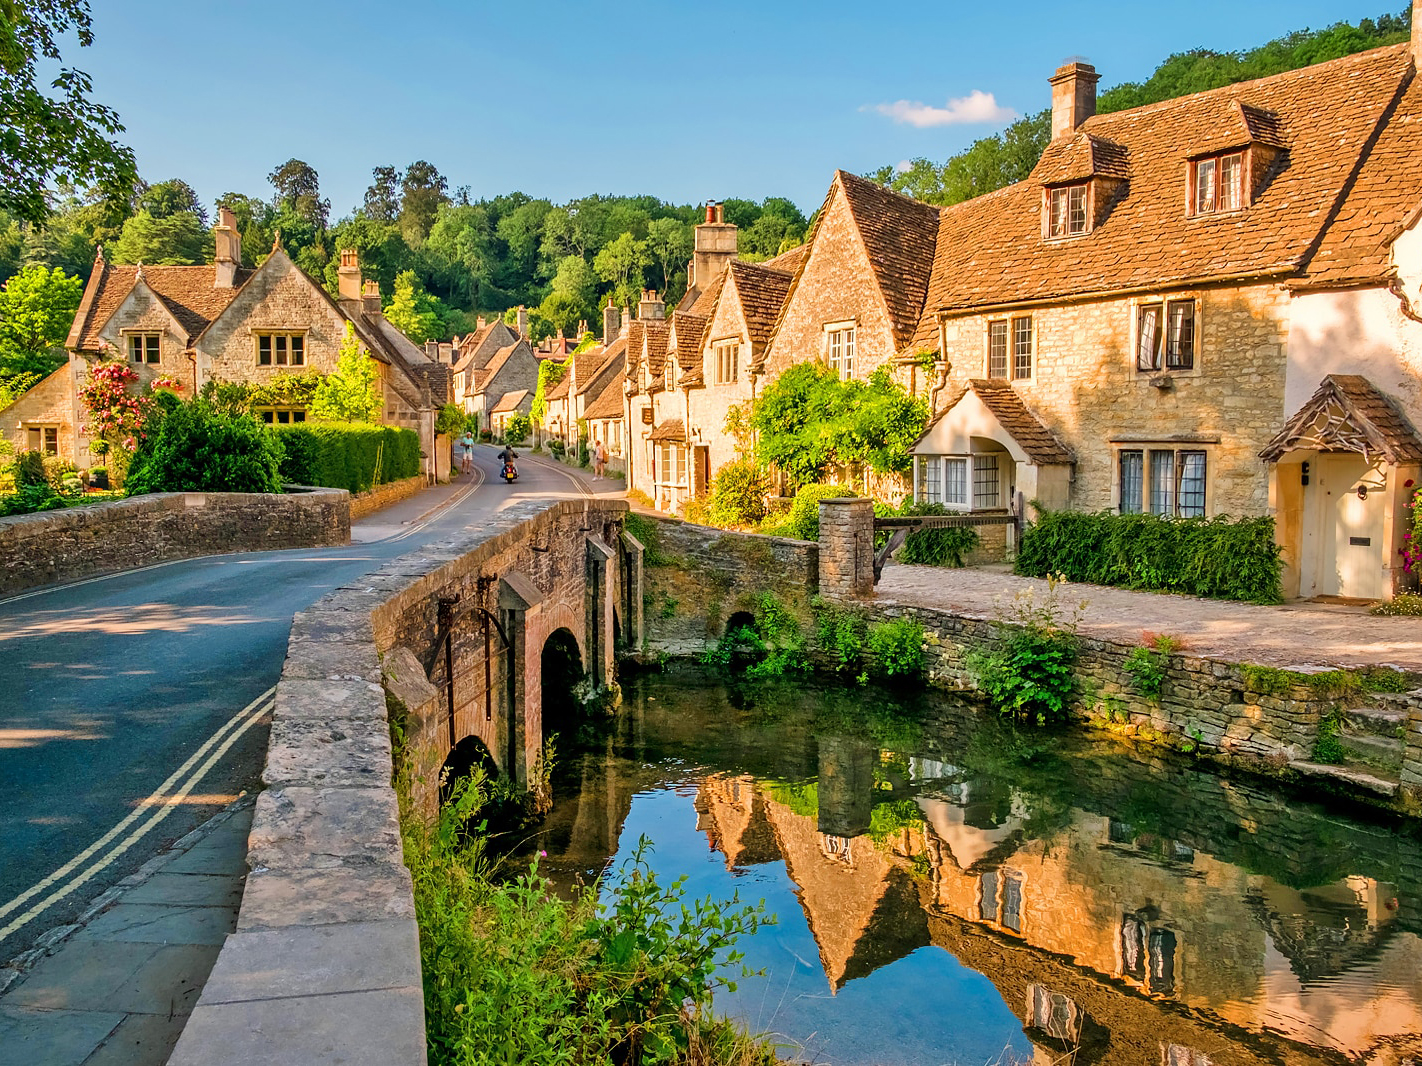 Top 5 destinations in UK - Cotswolds